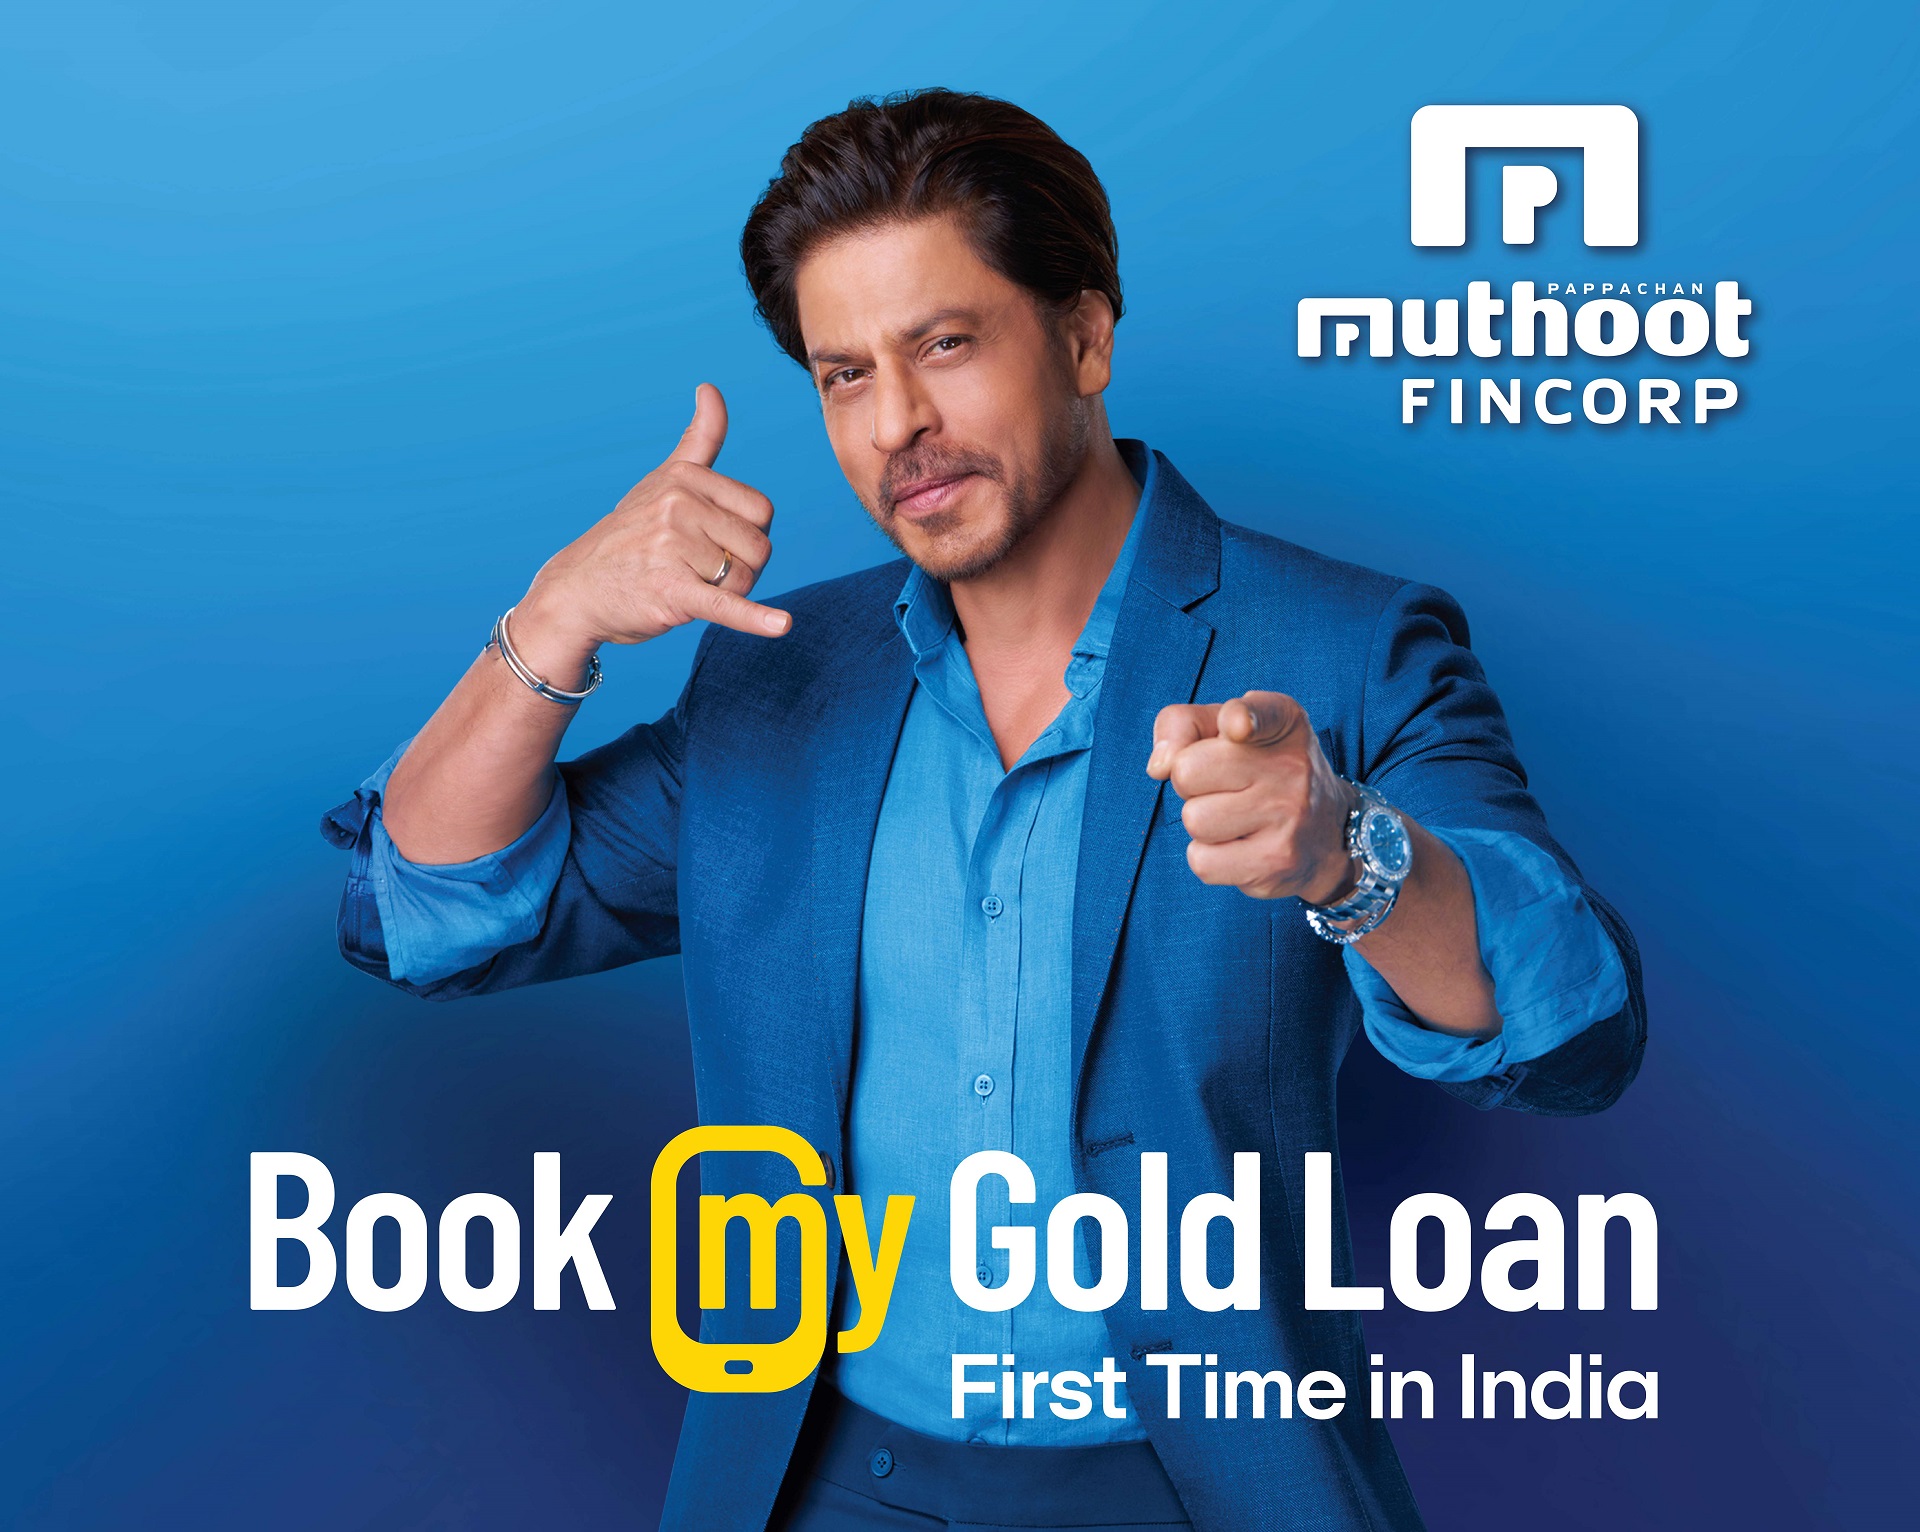 Muthoot FinCorp Launches ‘Book My Gold Loan’ Campaign with Shah Rukh Khan